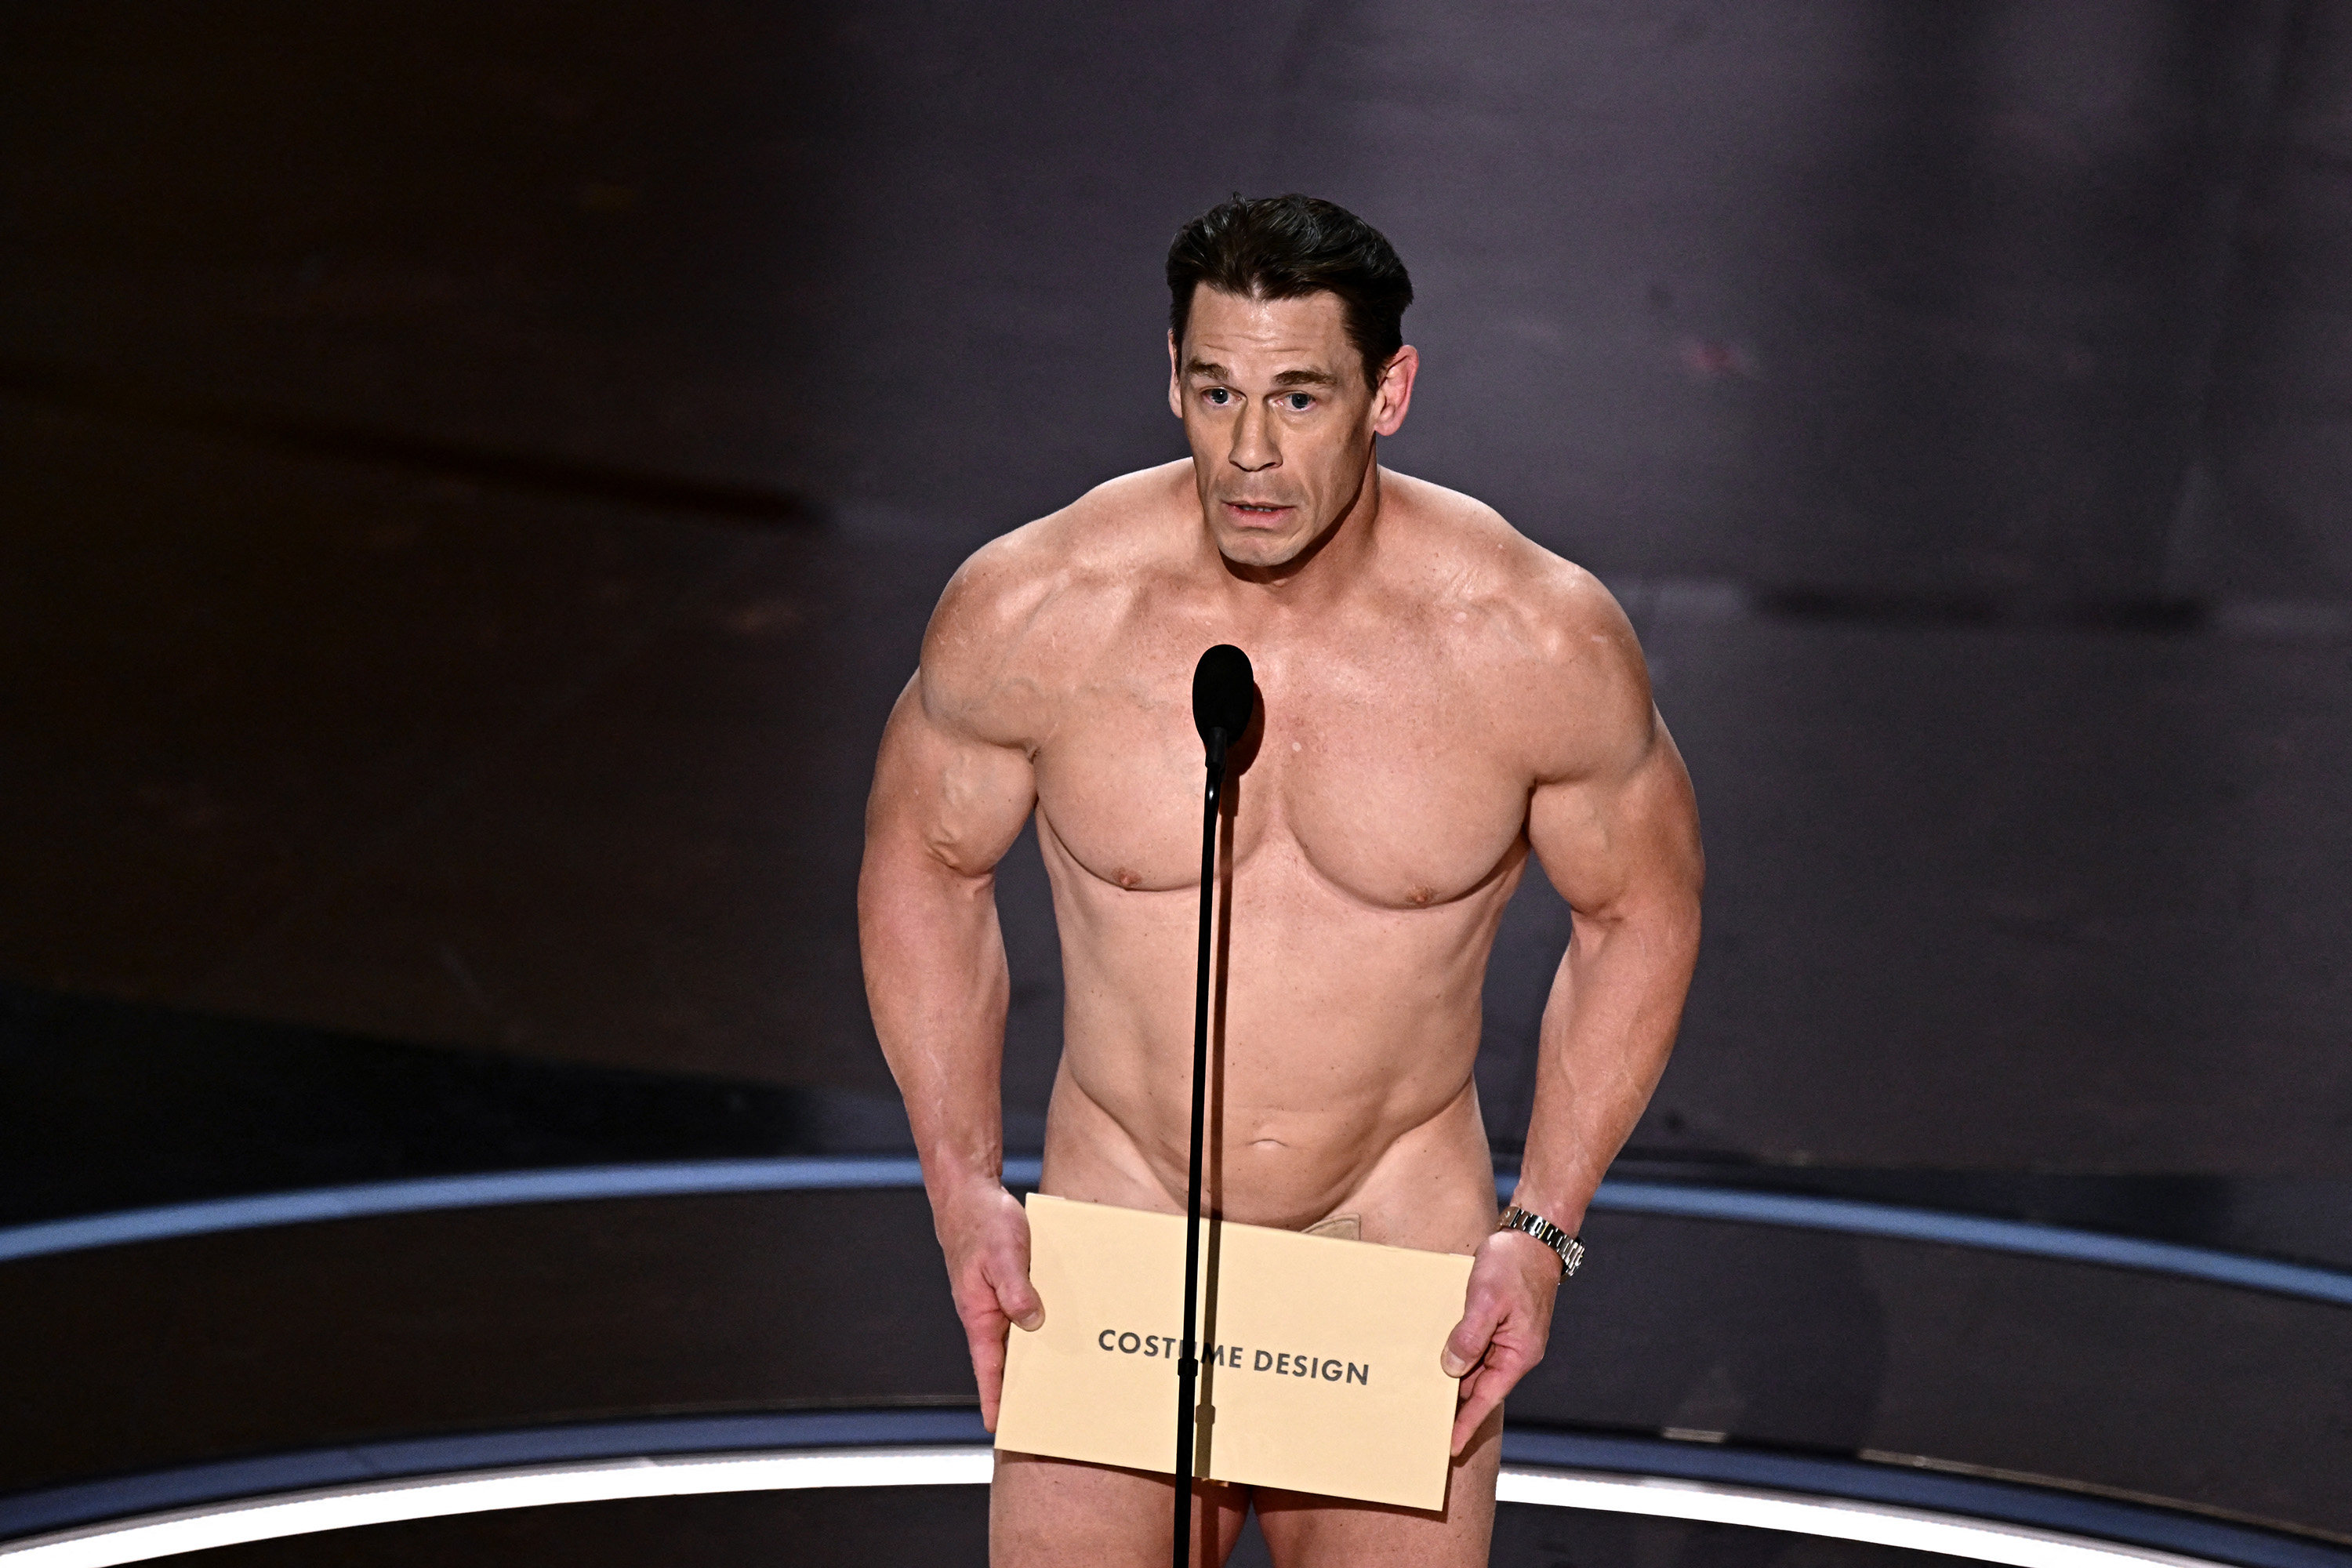 John Cena presents the award for best costume design onstage during the 96th Academy Awards at the Dolby Theatre in Hollywood, California, on Sunday, March 10, 2024. (Patrick T. Fallon/AFP/Getty Images/TNS)